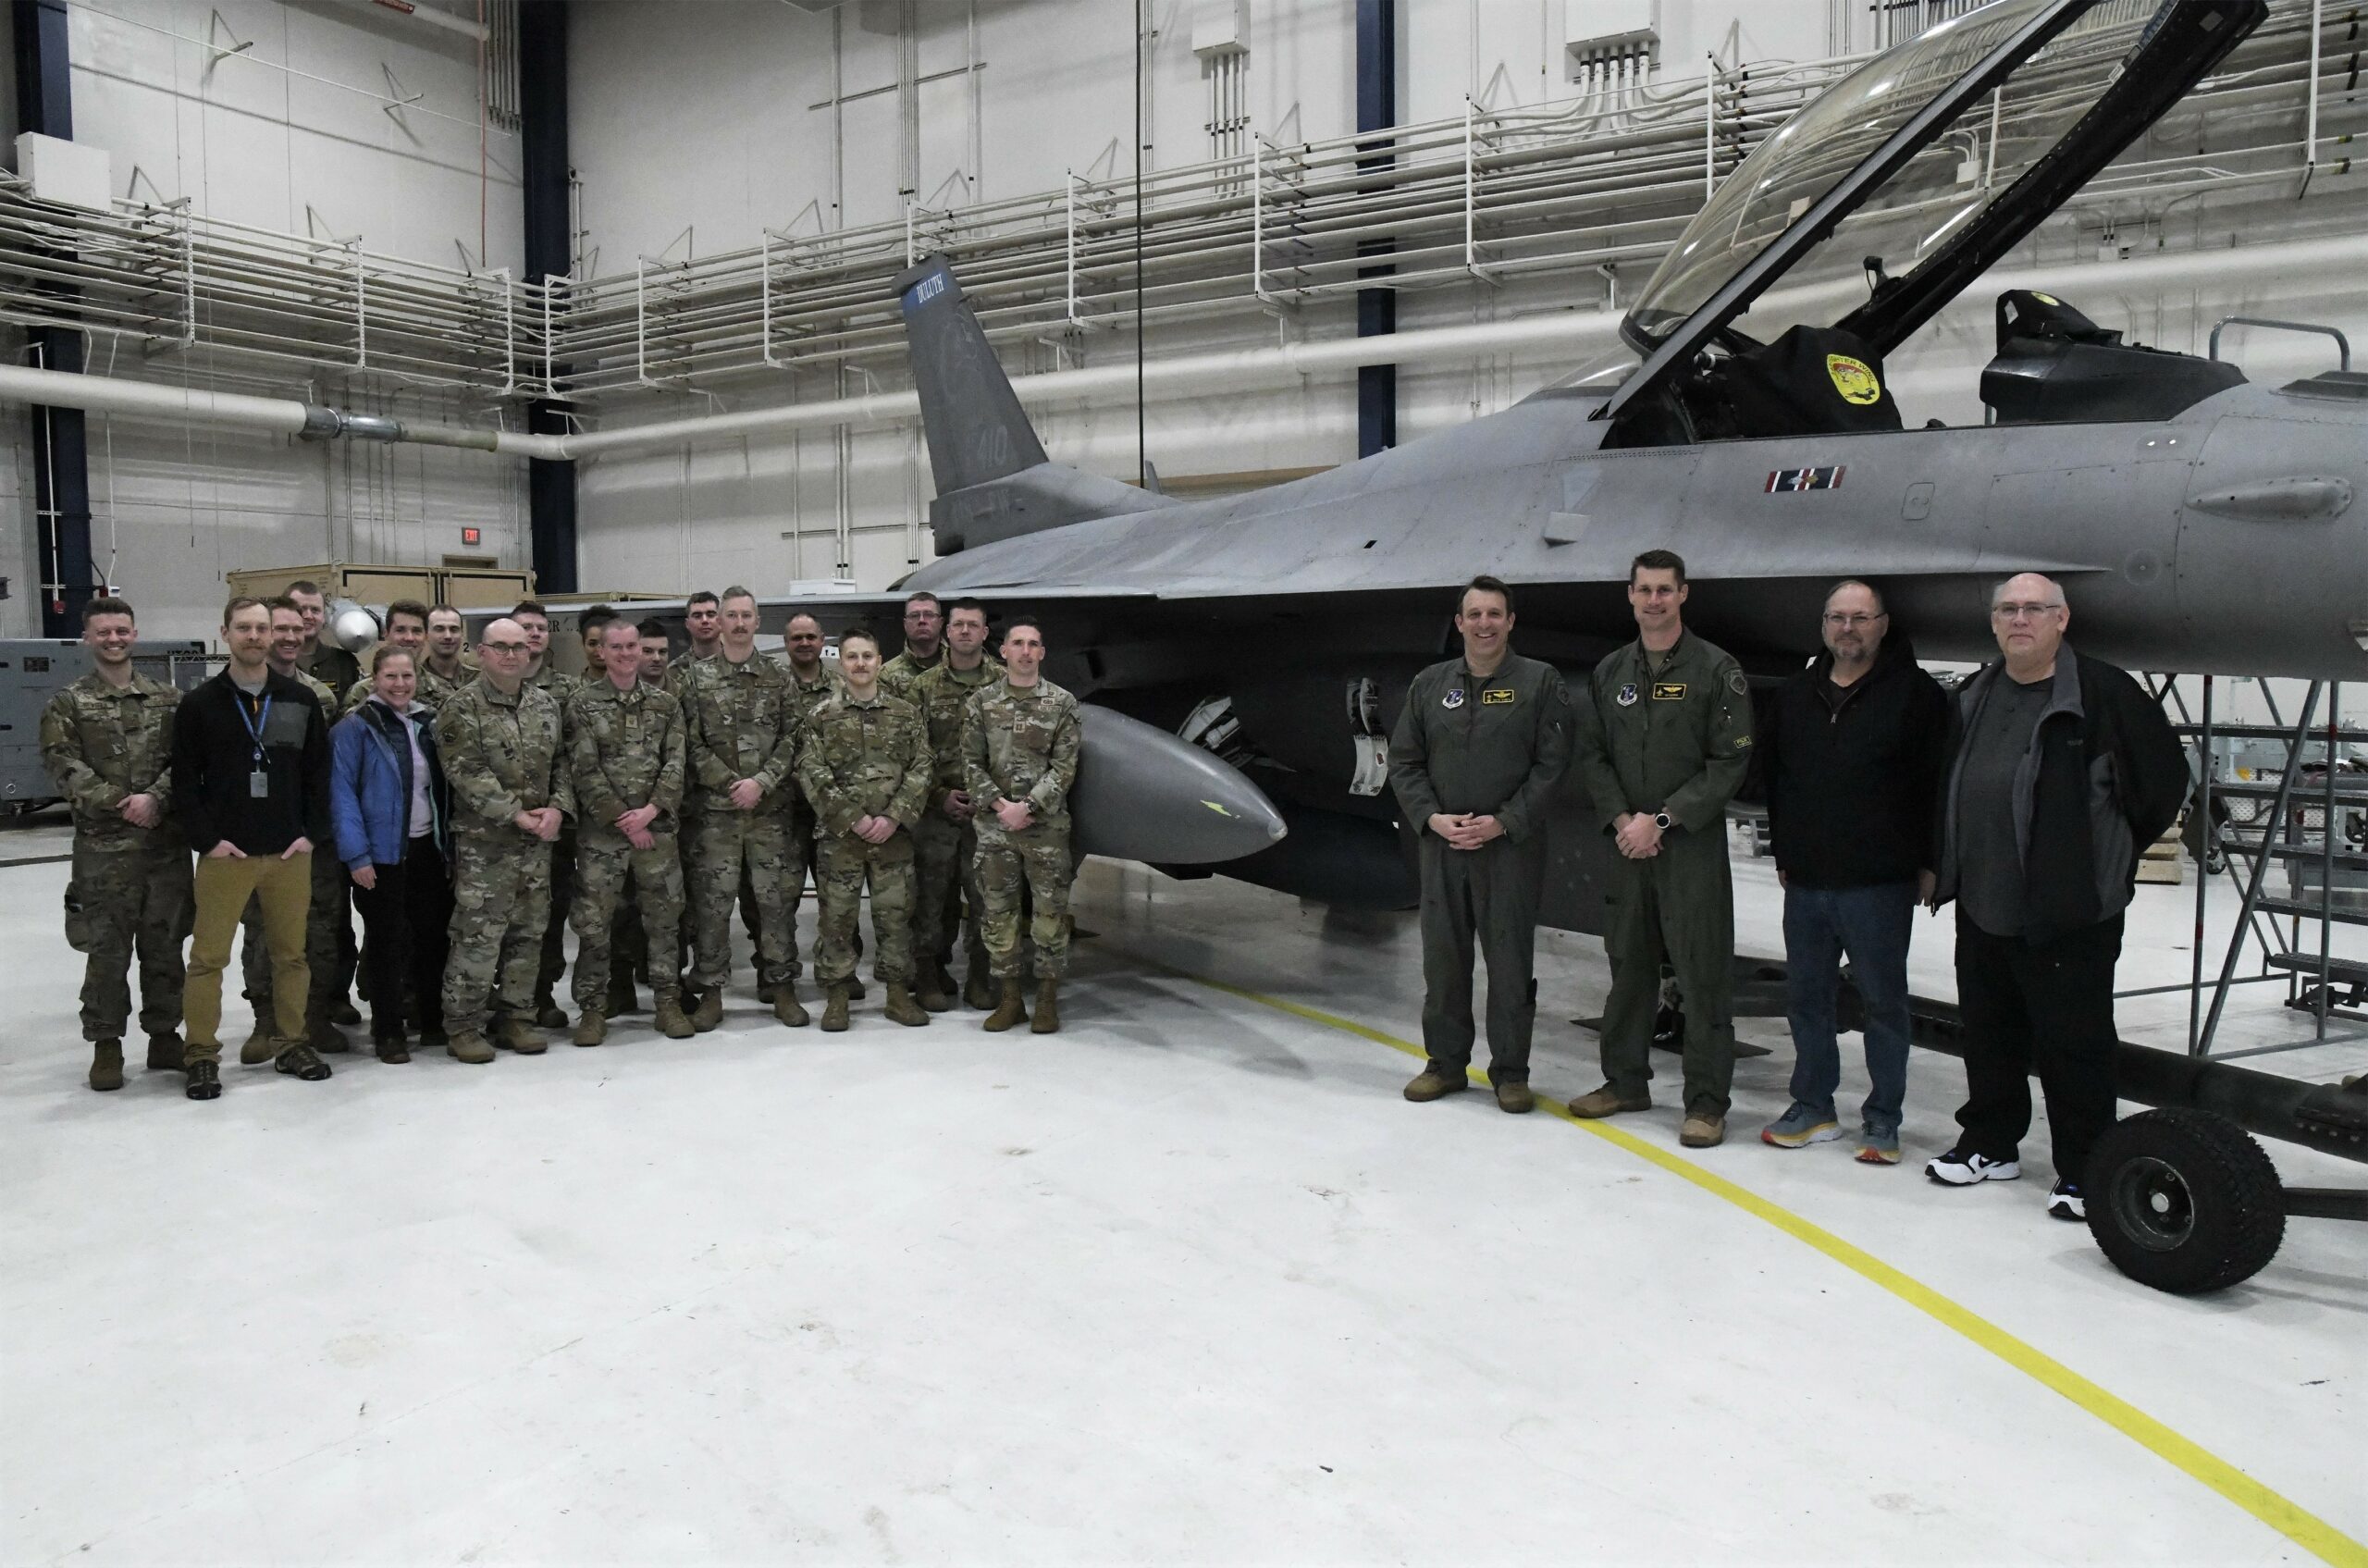 Subject matter experts from Air Combat Command, Air Force Materiel Command, the Air National Guard, Air Force Life Cycle Management Center, Air Force Reserve Test Center (AATC) and 148th Fighter Wing pose for a photo after the first AN/ASQ-236 radar was installed on an Block 50 F-16 Fighting Falcon on January 25, 2023. The 148th Fighter Wing has been designated as the Air National Guard’s Center for Excellence for all F-16 fighter aircraft. (U.S. Air National Guard photo by Audra Flanagan)